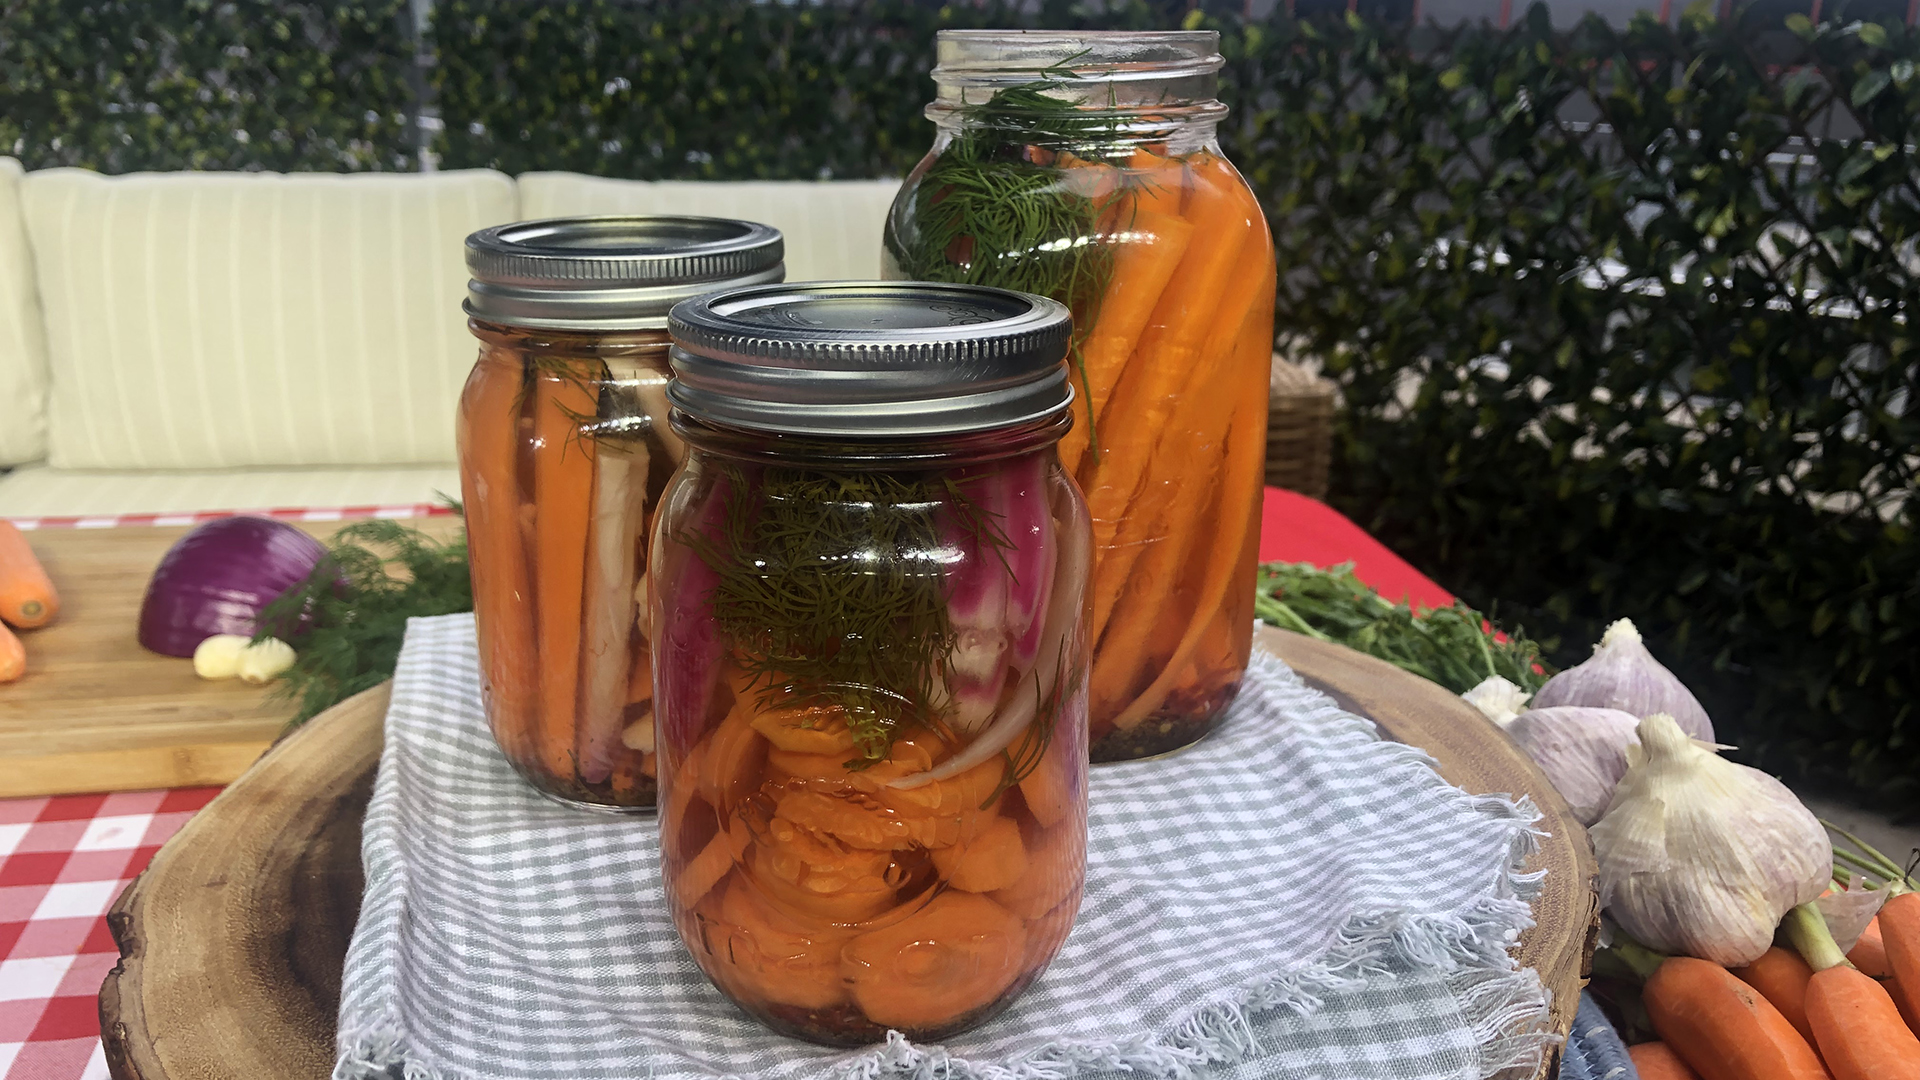 Sweet and spicy pickled carrots (Happud porgandid)